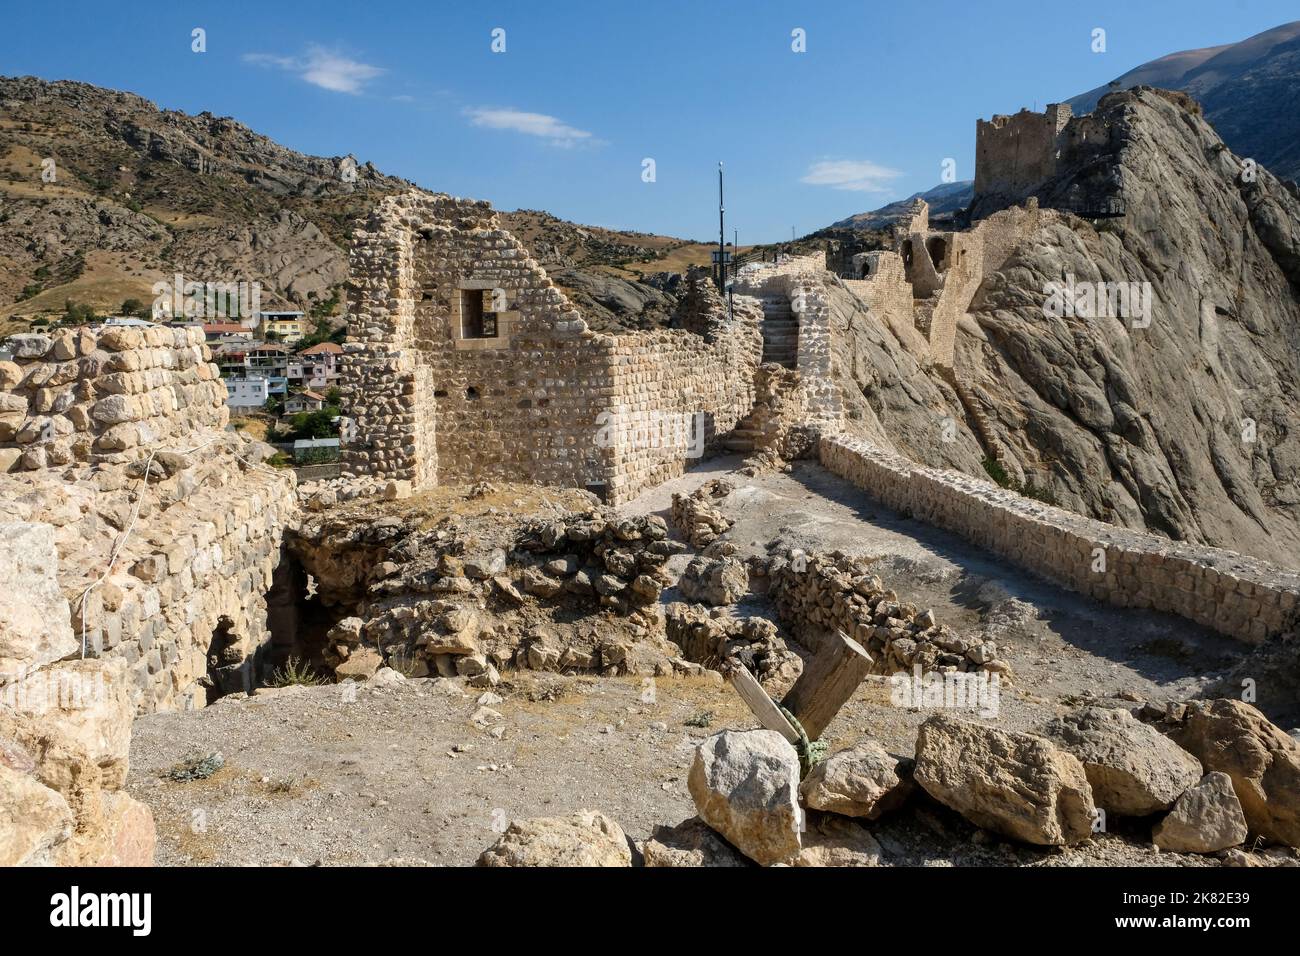 Built by the Commagene civilization, Kahta Castle fascinates visitors with its bazaar, mosque, dungeon, and waterways. Stock Photo